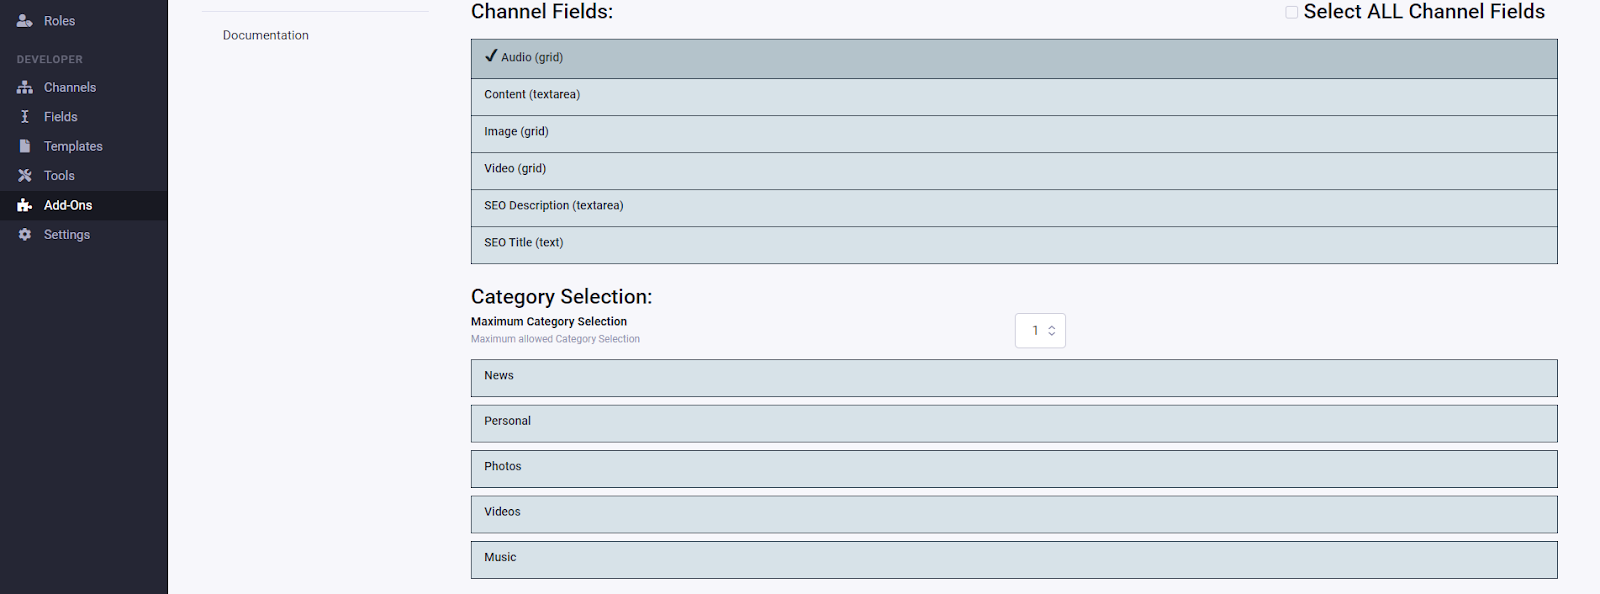 Smart Channel Forms for ExpressionEngine - channel fields and categories